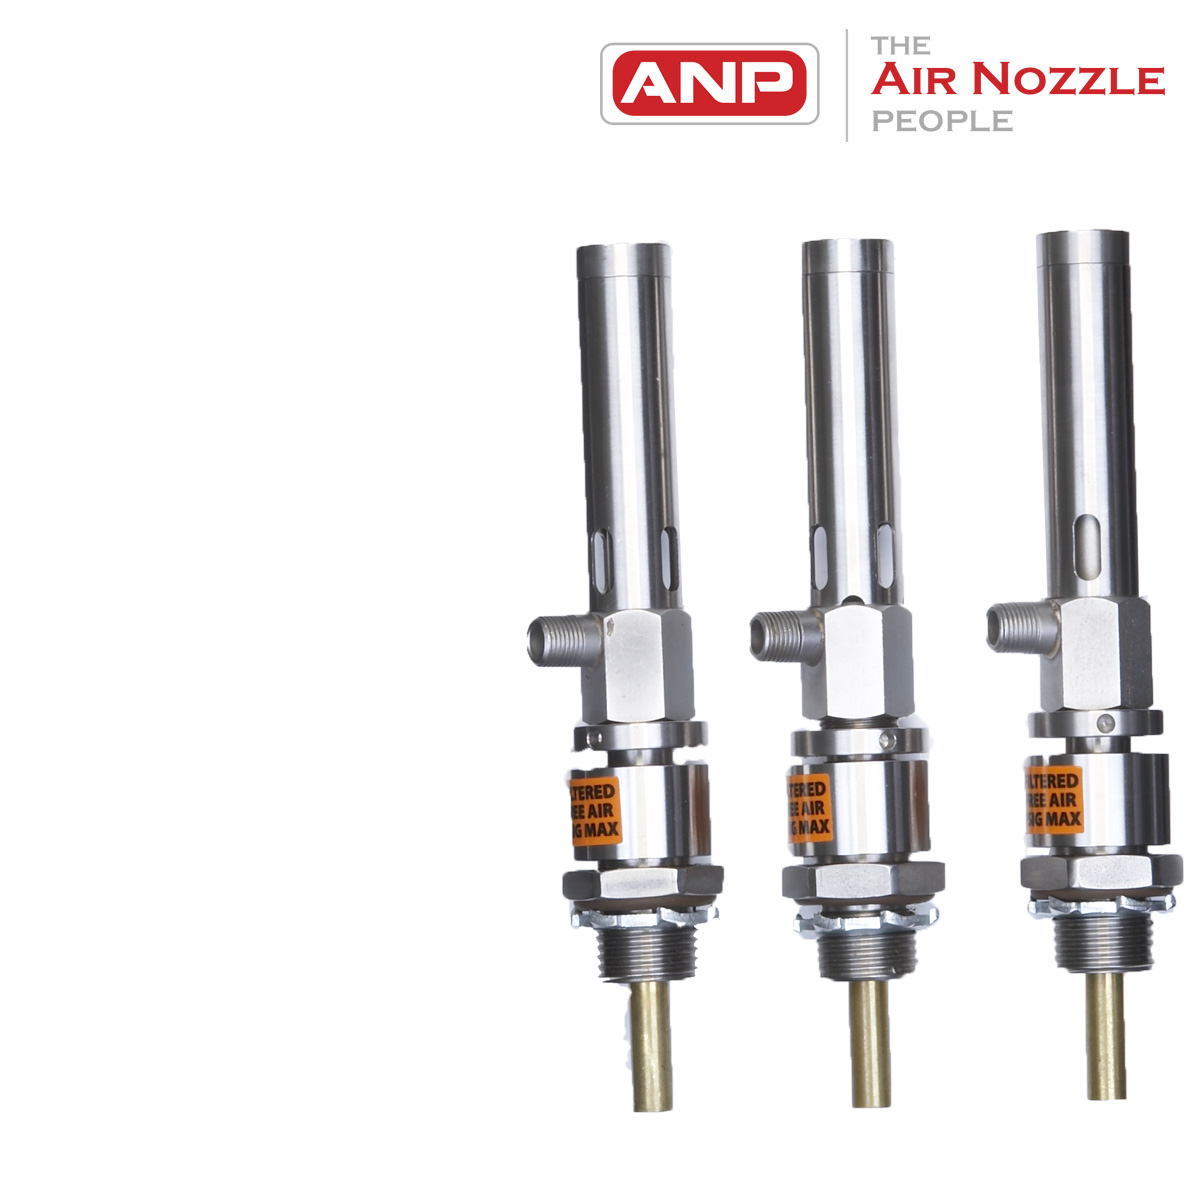 Air Nozzle People Promo